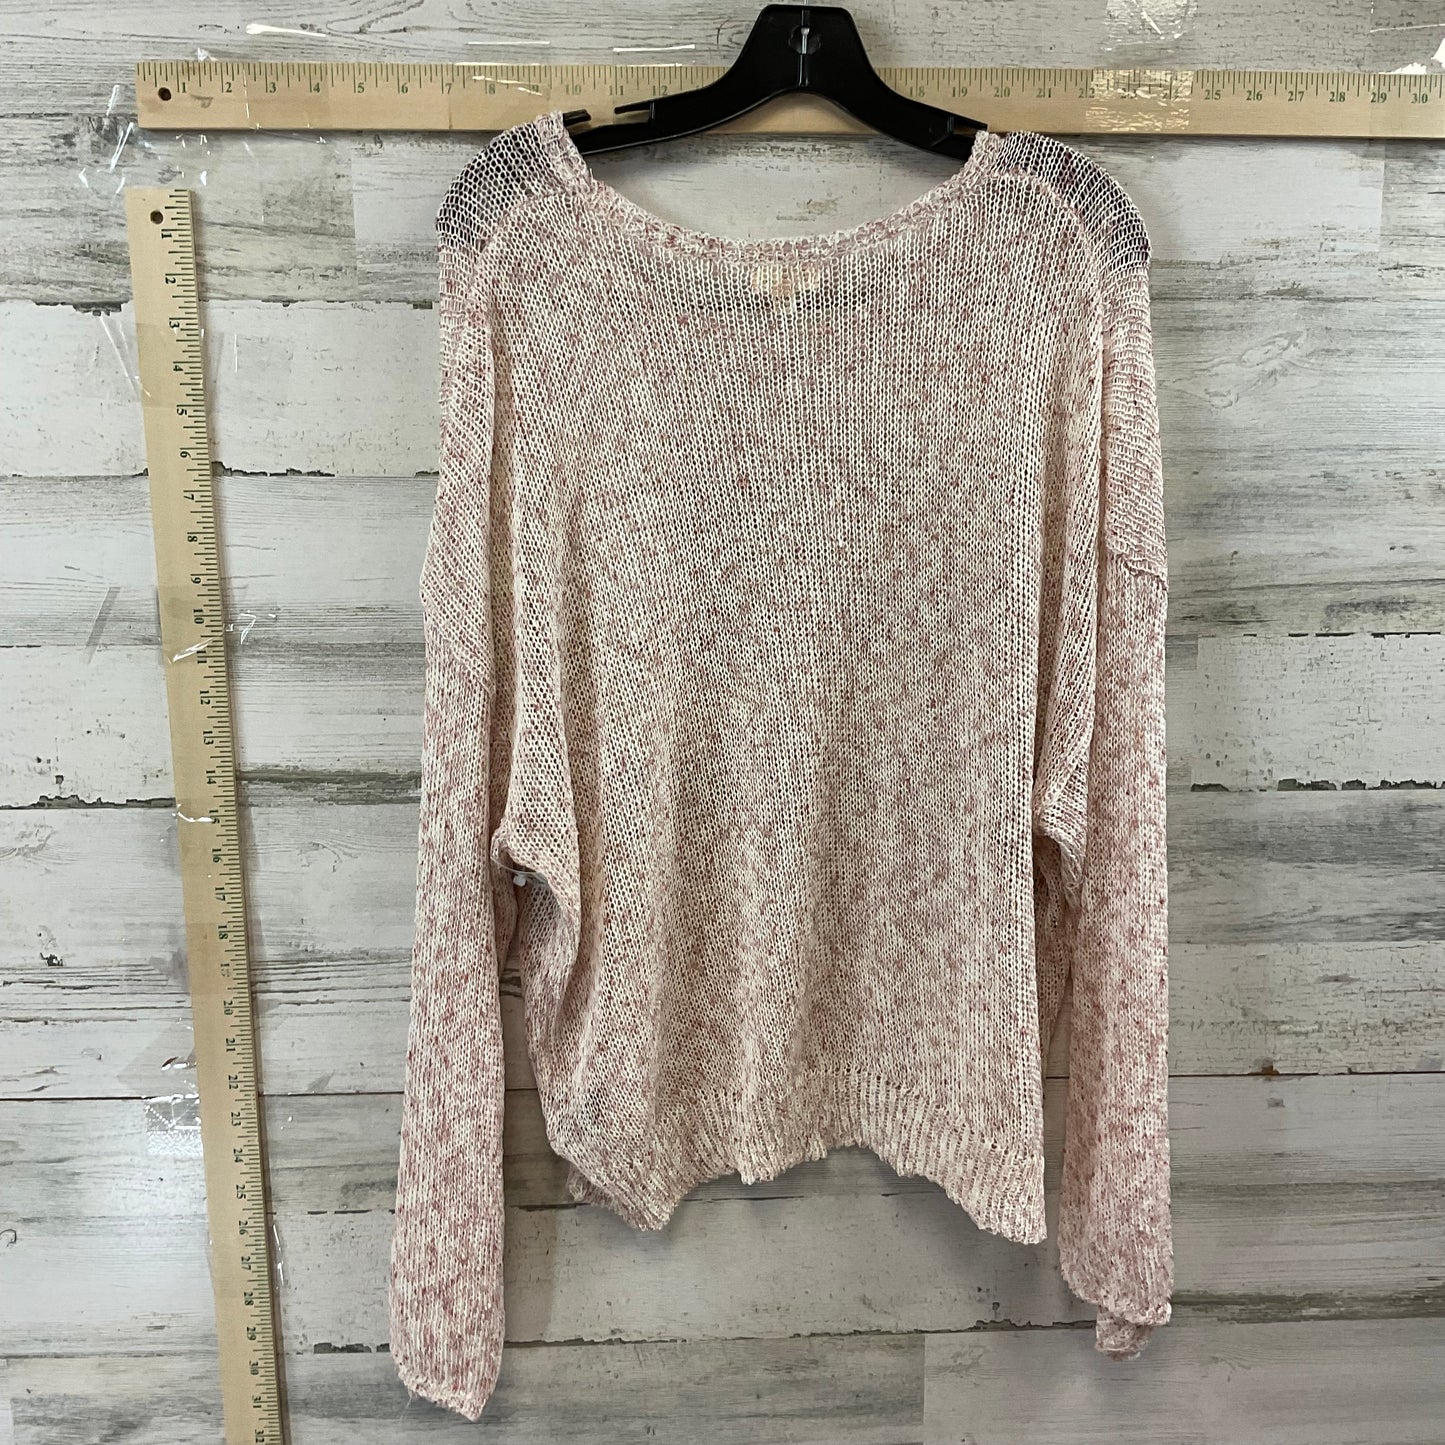 Top Long Sleeve By Pol  Size: L